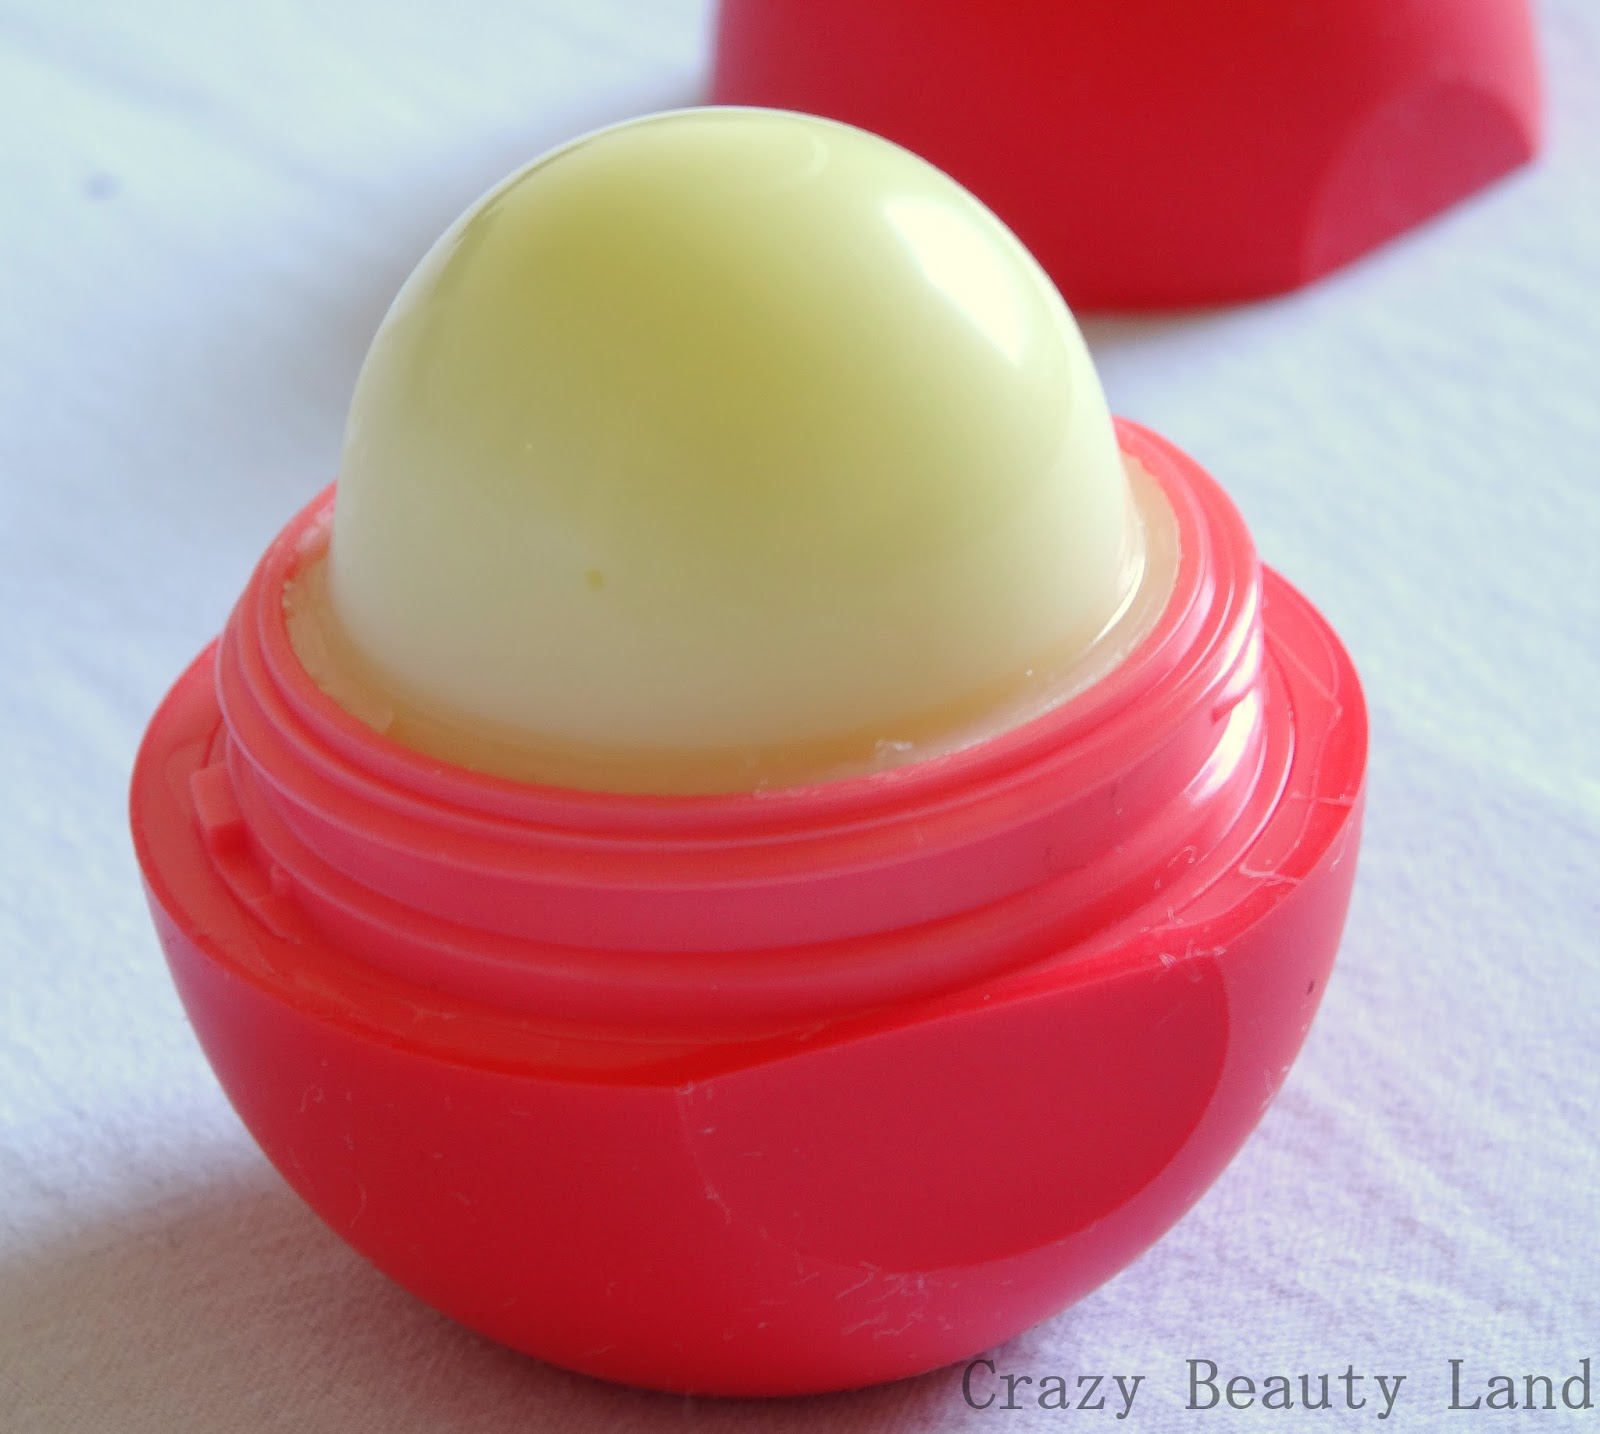 EOS Organic Lip Balm Sphere in Summer Fruit review in India